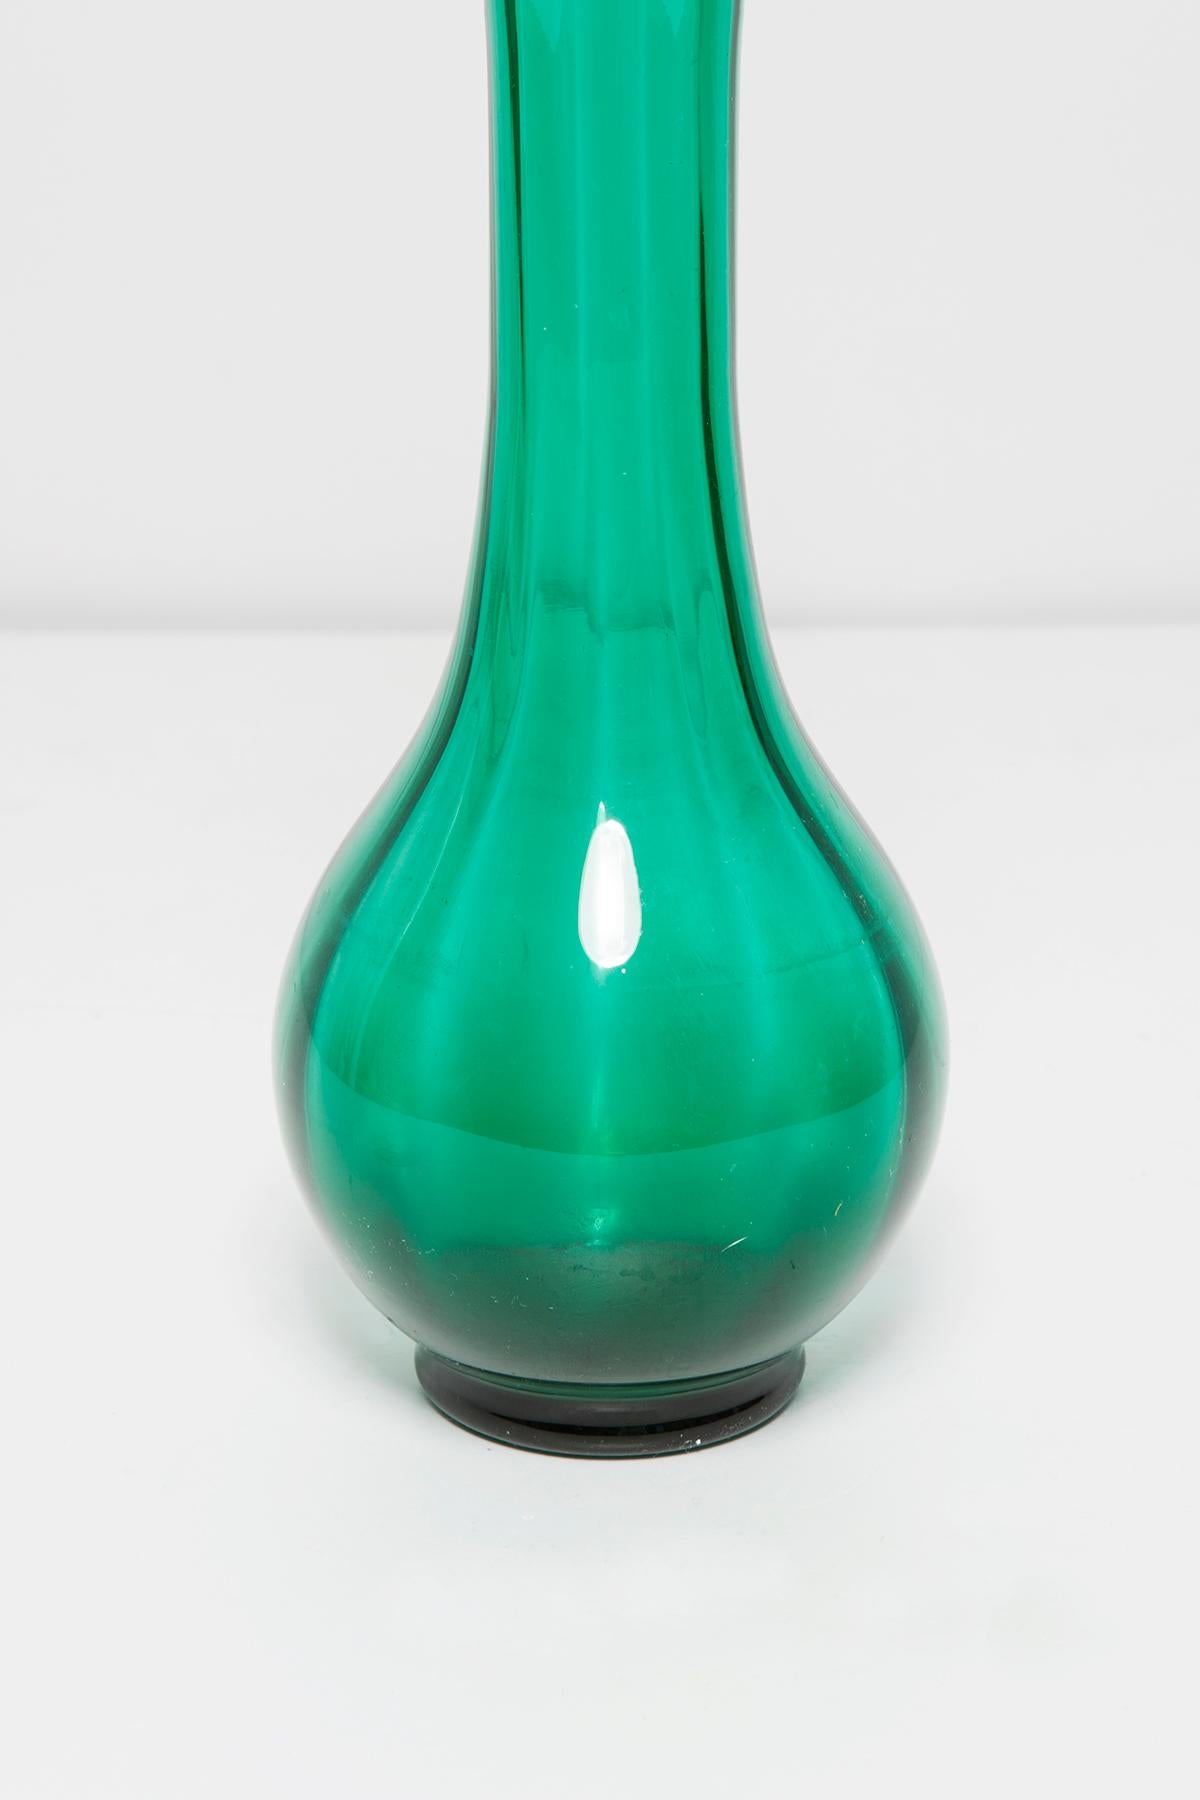 Mid Century Vintage Artistic Glass Green Vase, Europe, 1970s For Sale 2